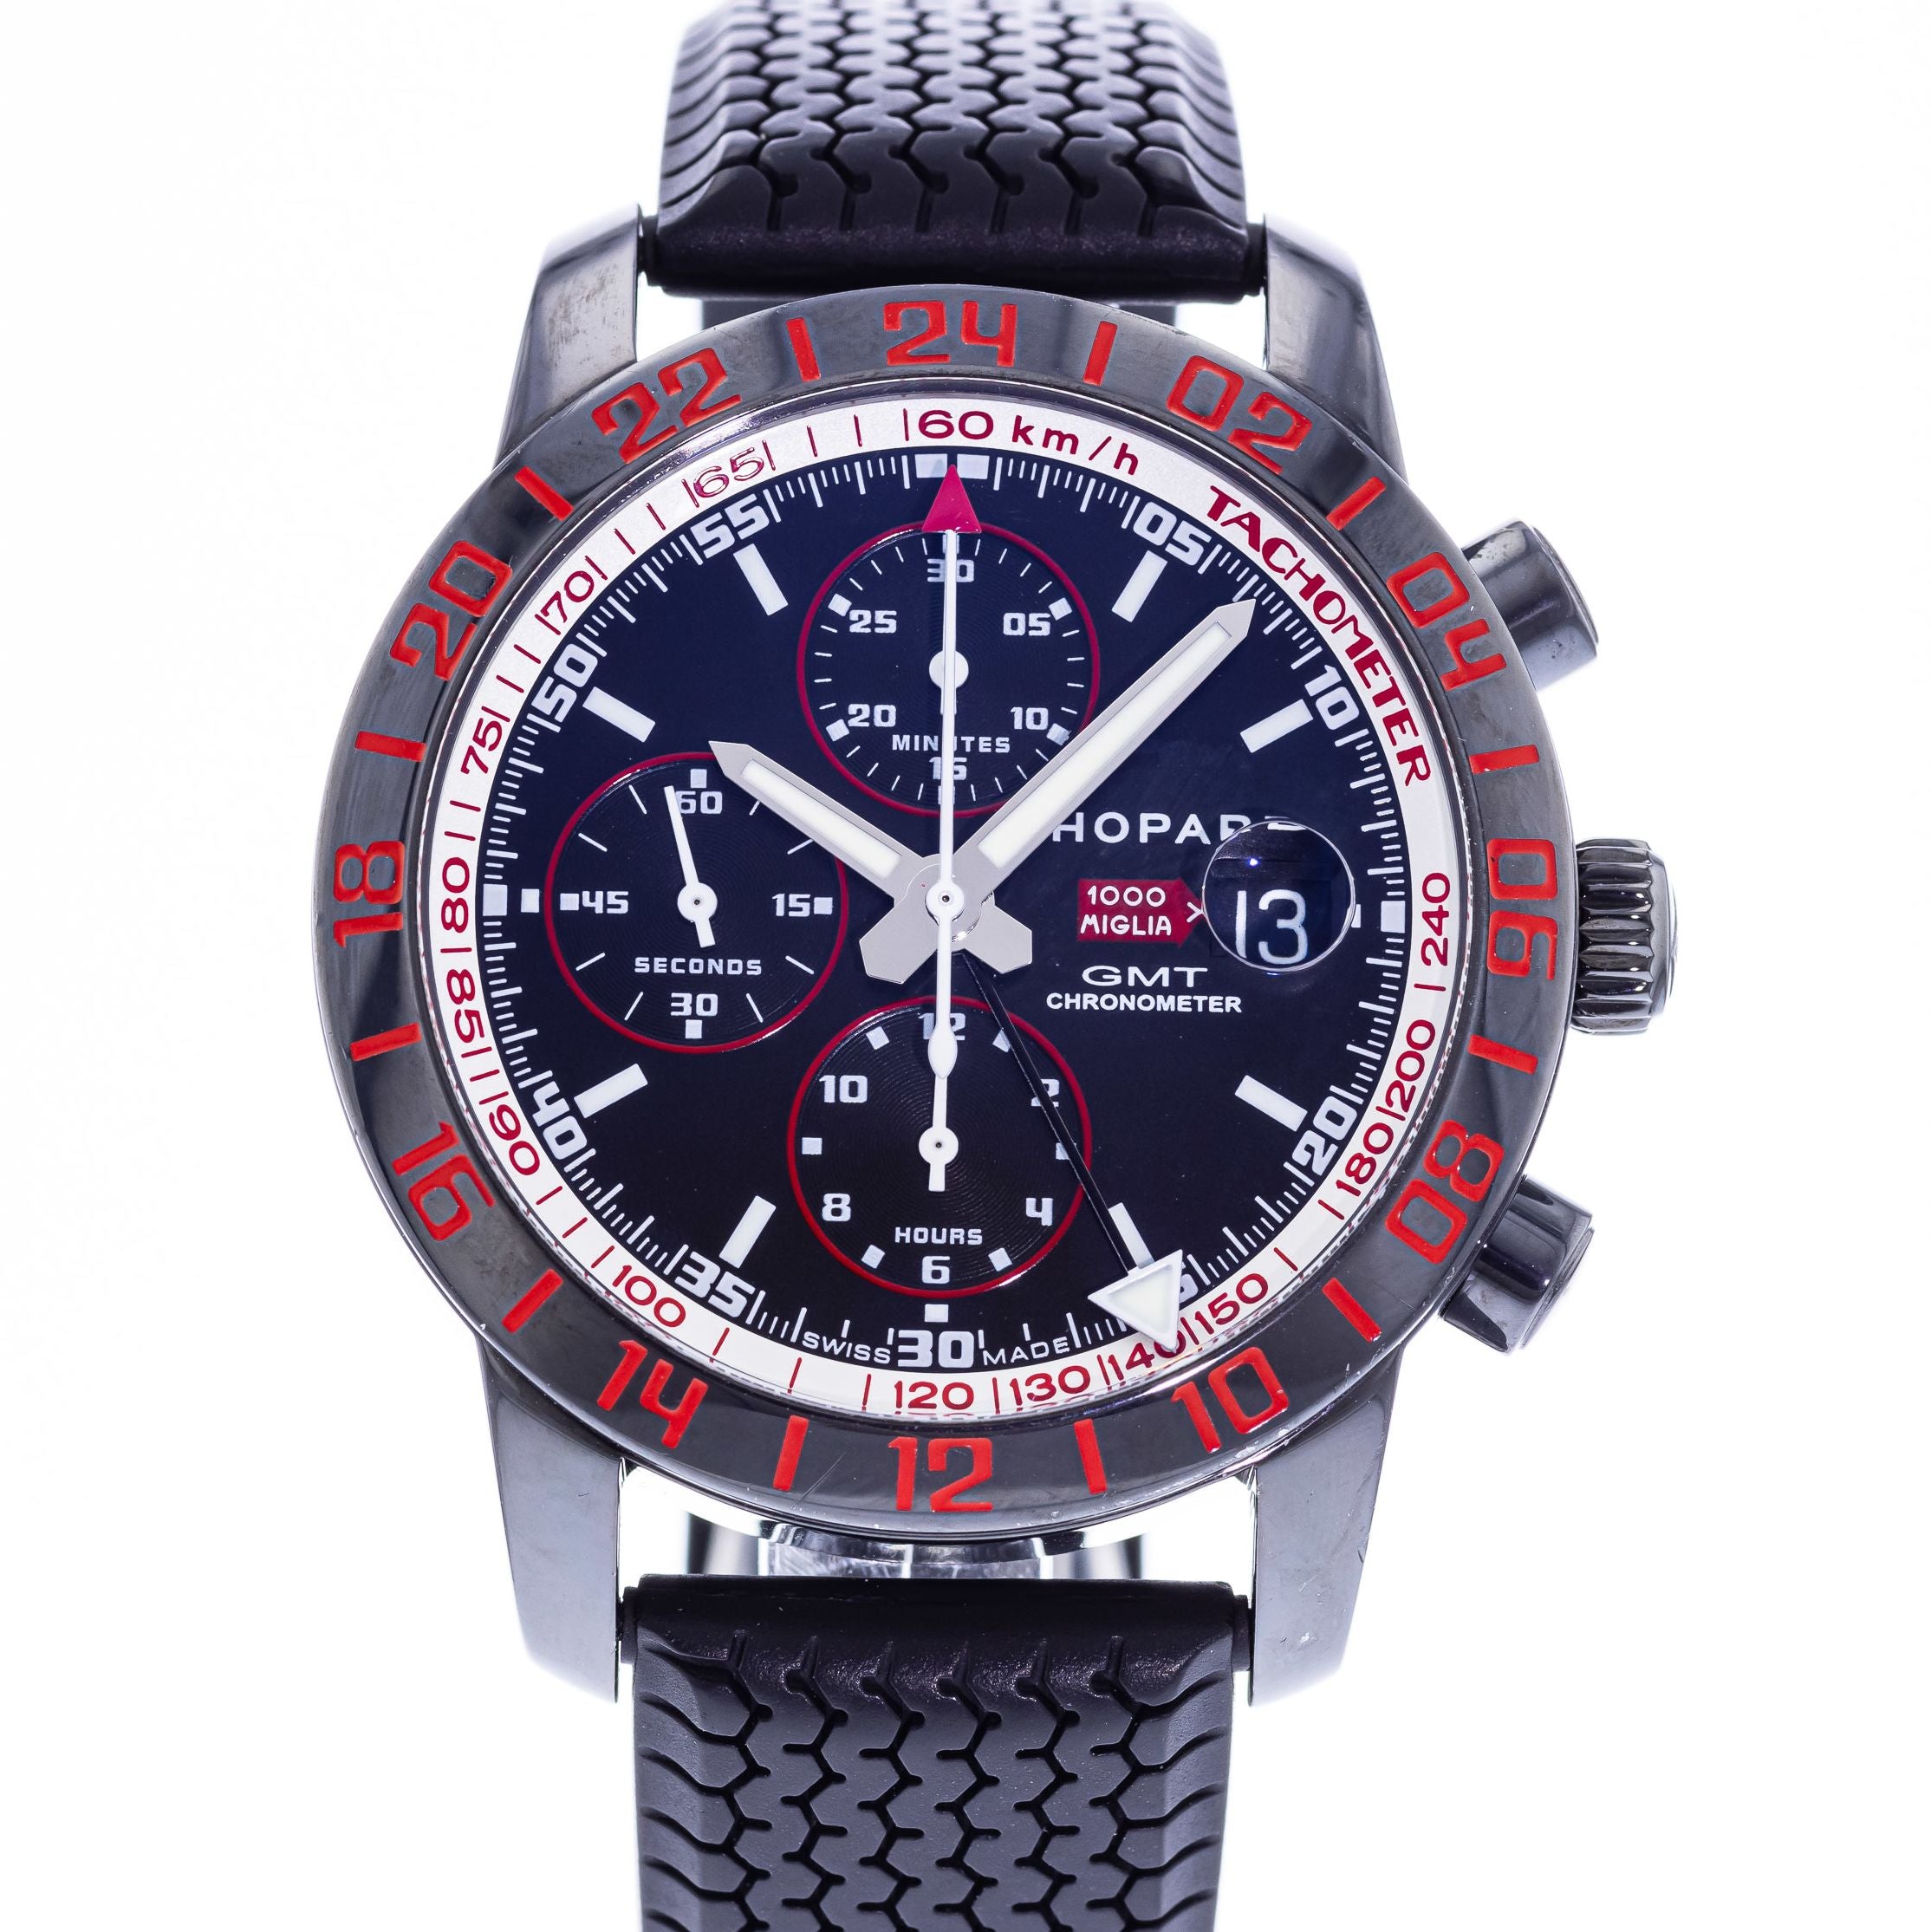 Buy the latest luxury watches from Chopard/Mille Miglia now!